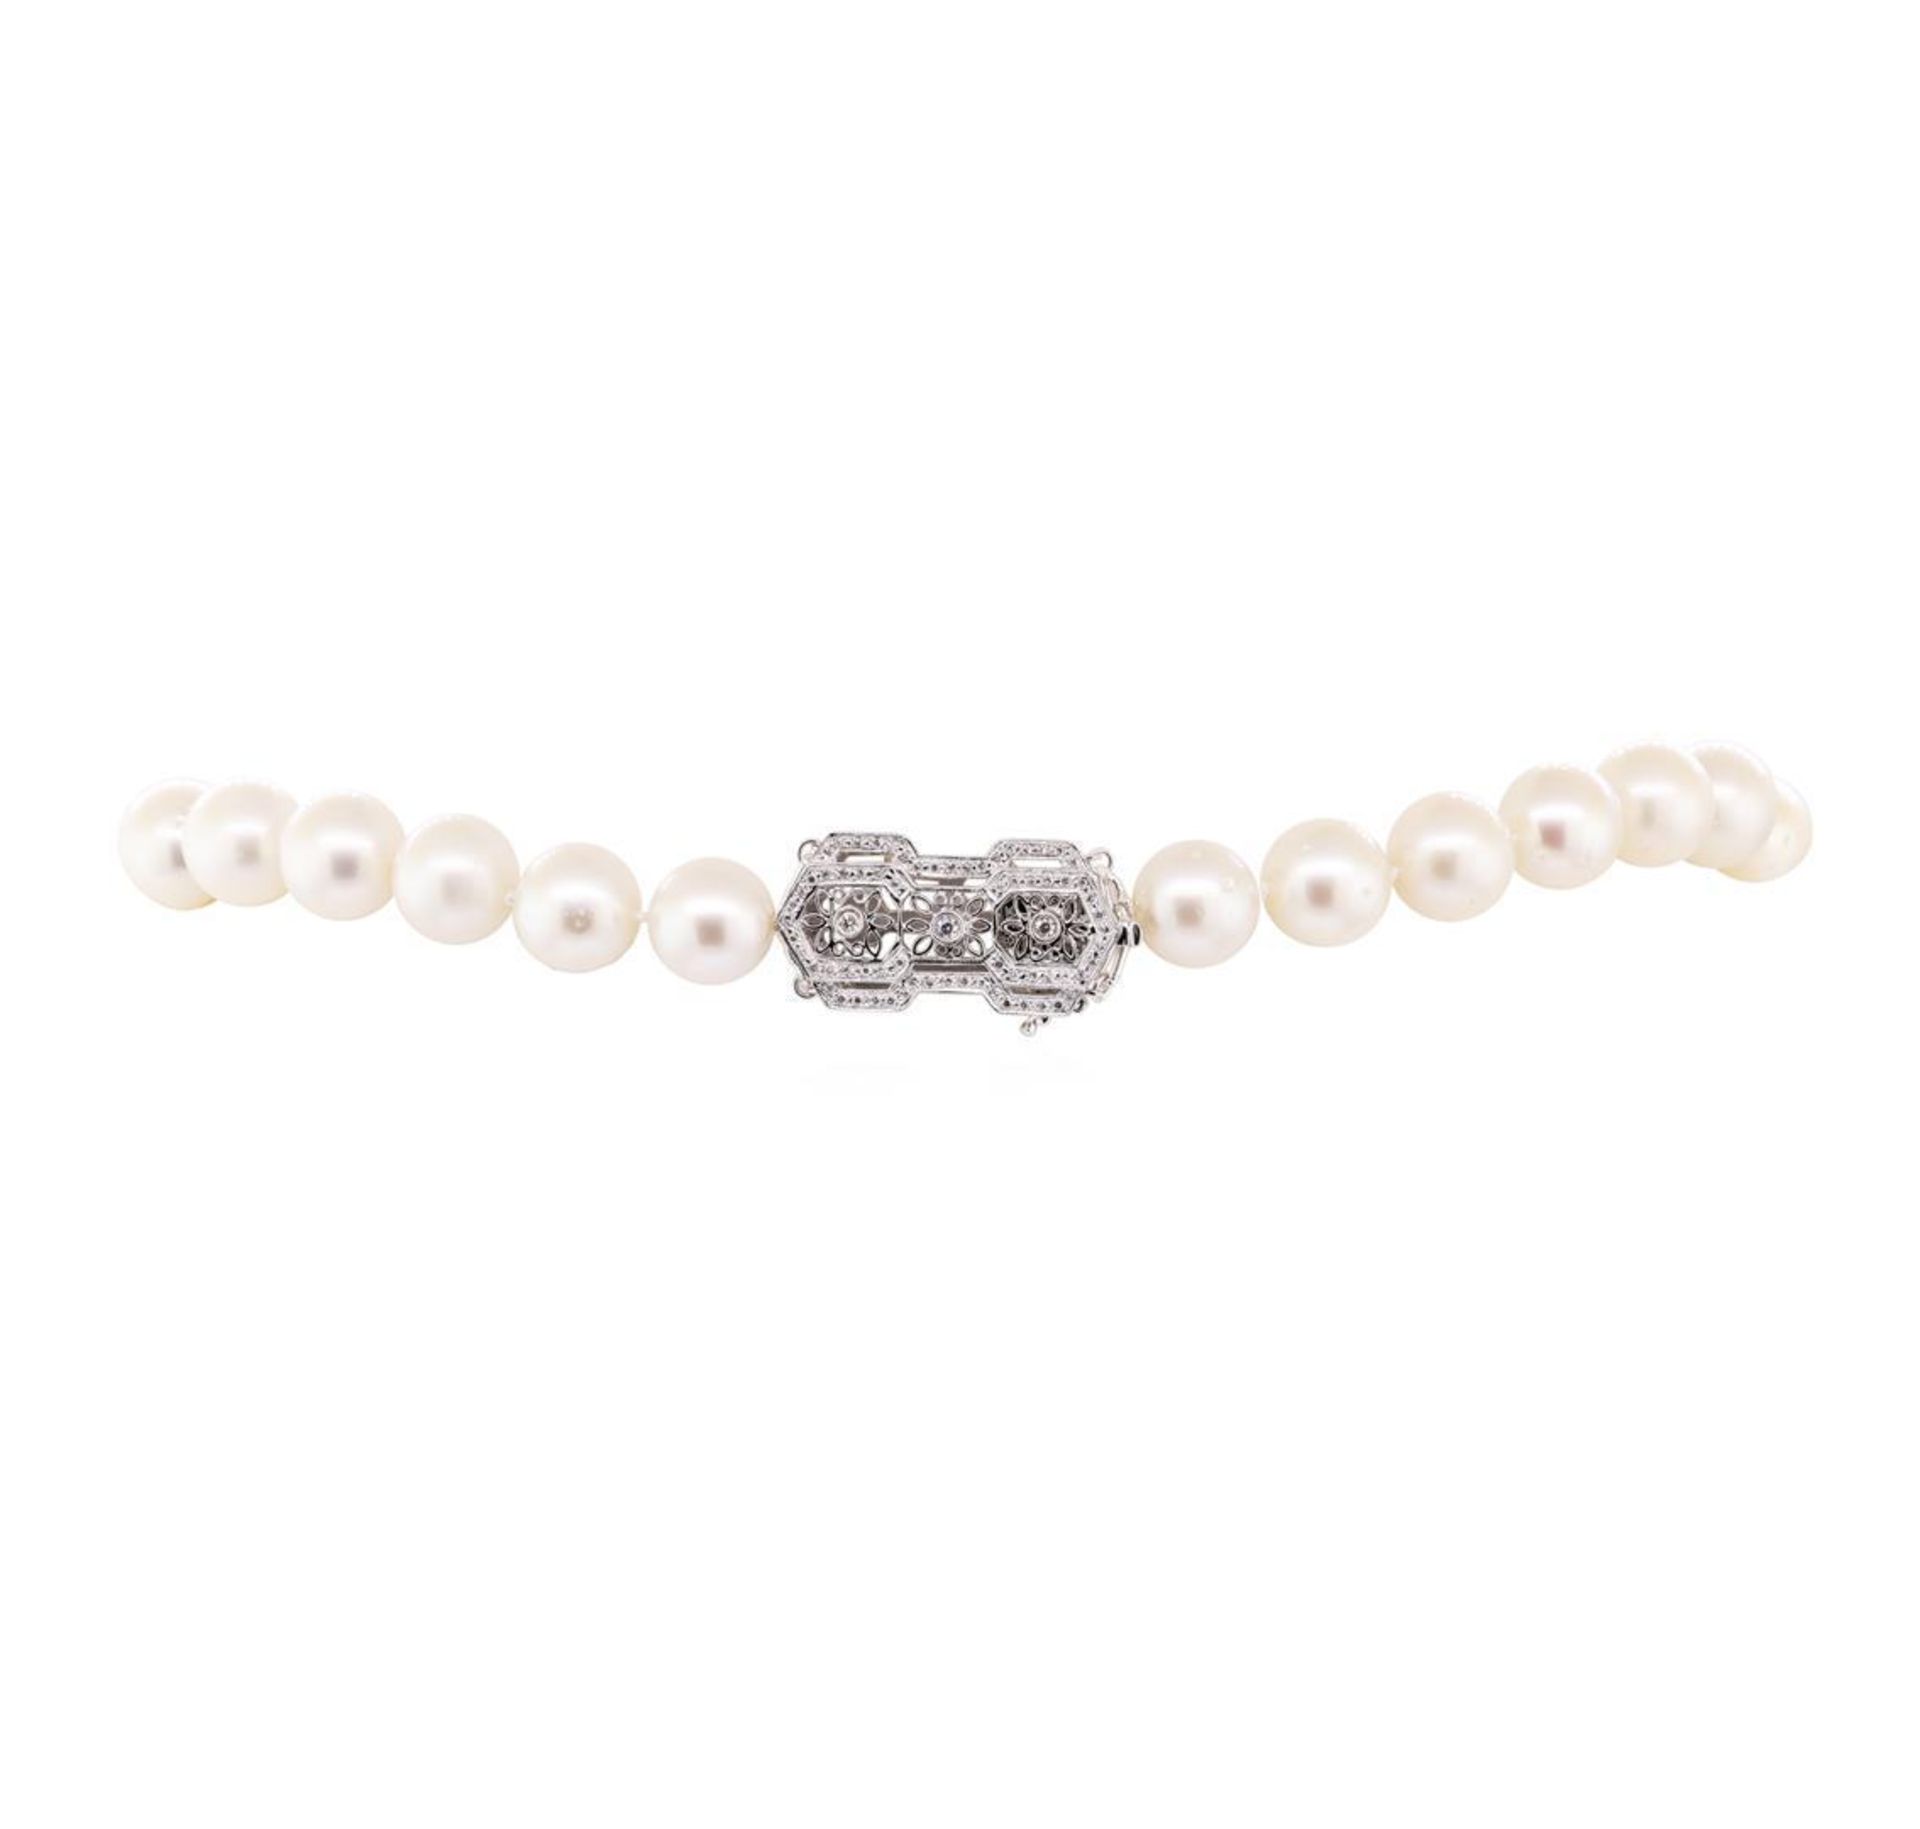 0.71 ctw Diamond and South Sea Pearl Necklace - 14KT White Gold - Image 3 of 4